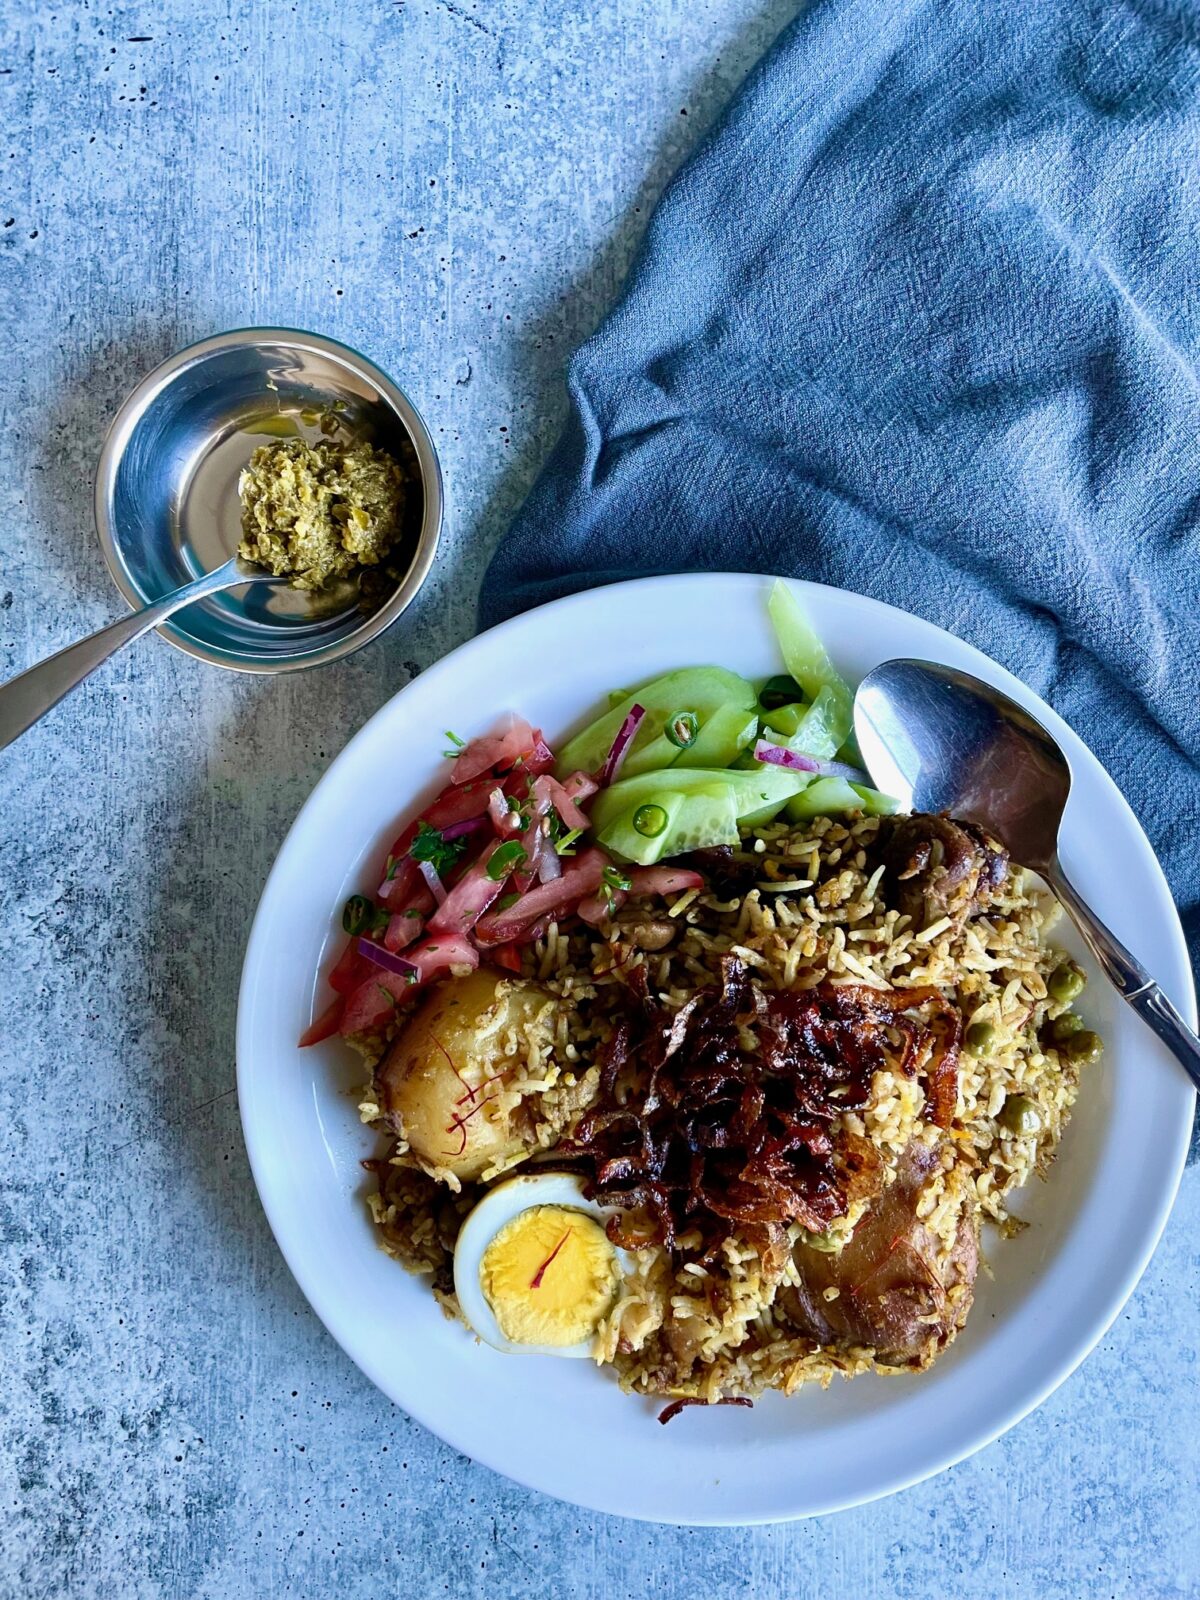 Plate of chicken biryani (briani) with tomato chutney, cucumber salad, and topped with fried red onion. Spoon on the right of the plate. A small bowl of green chili paste with a teaspoon on the upper left side of the plate.